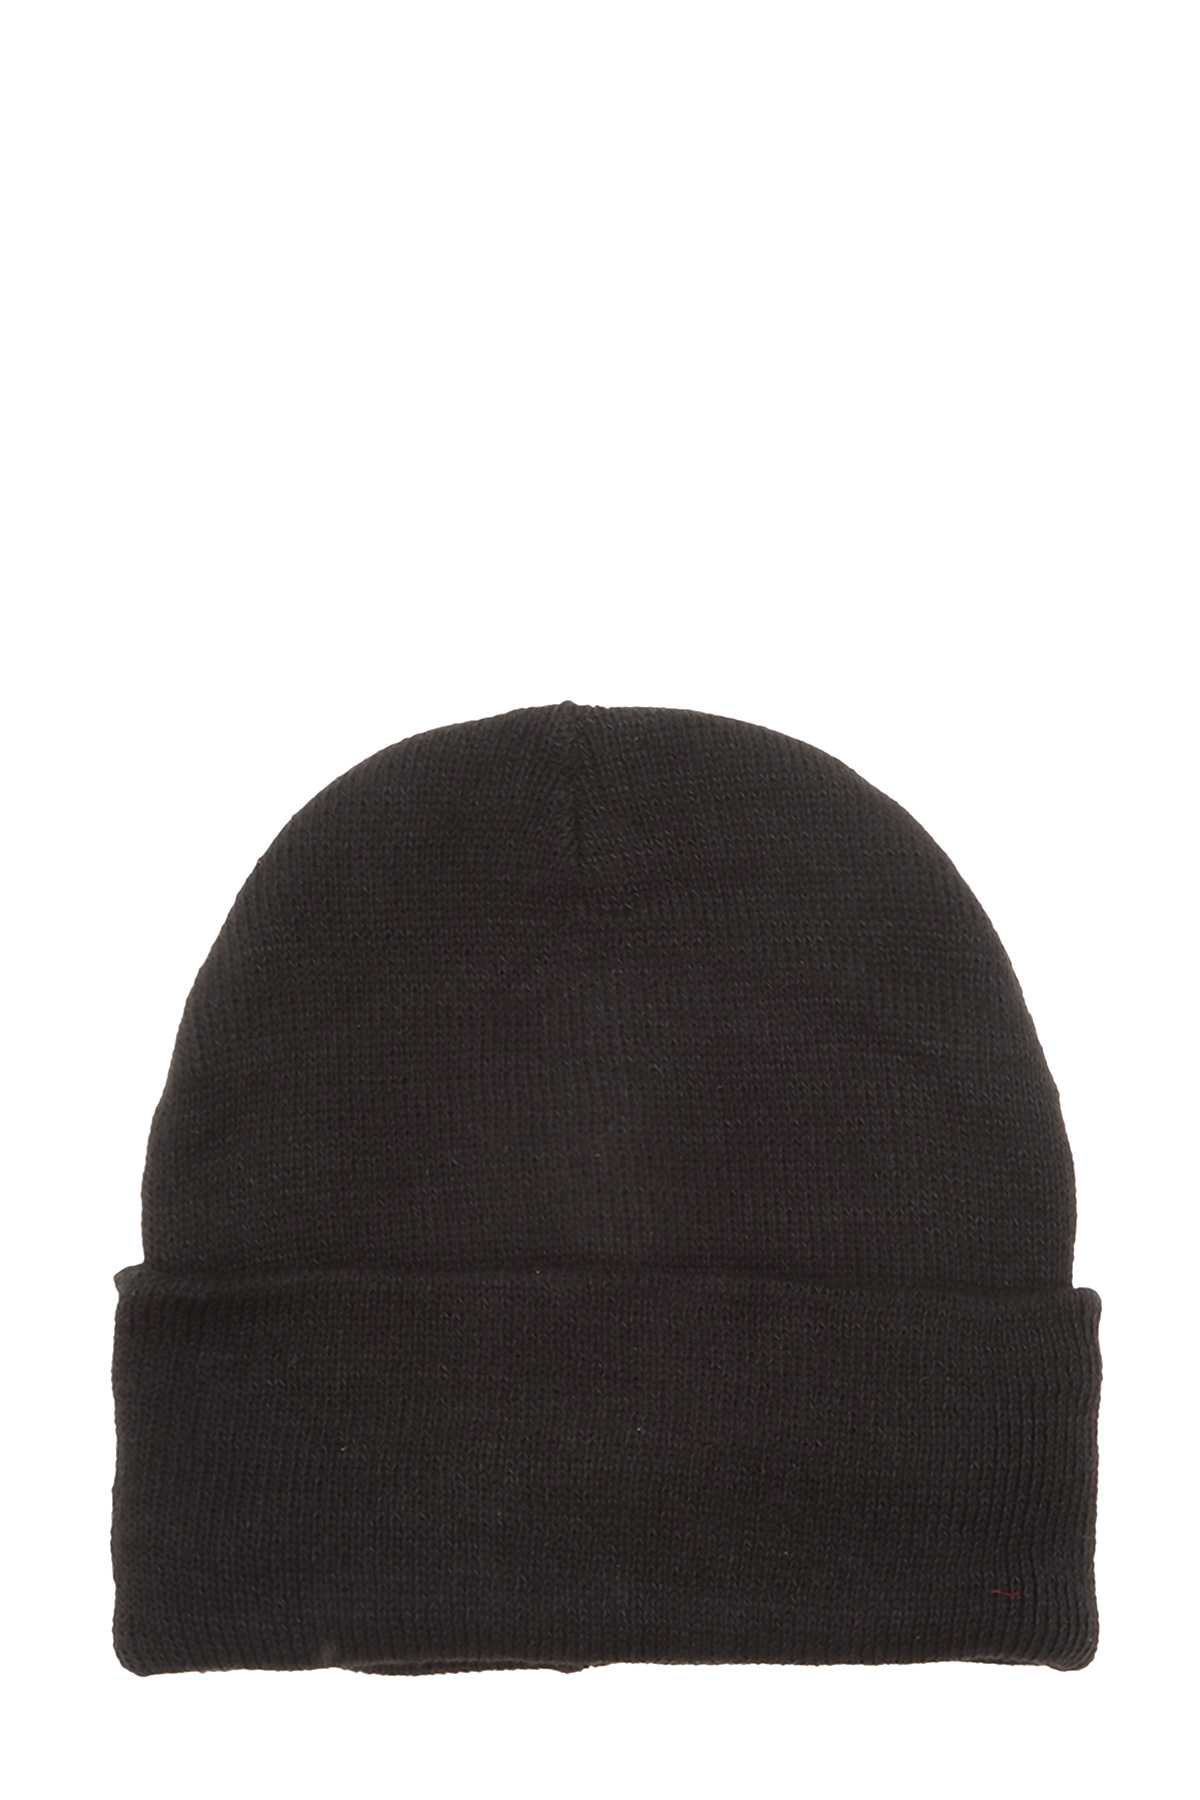 Black Knit Beanie with Inner Lining